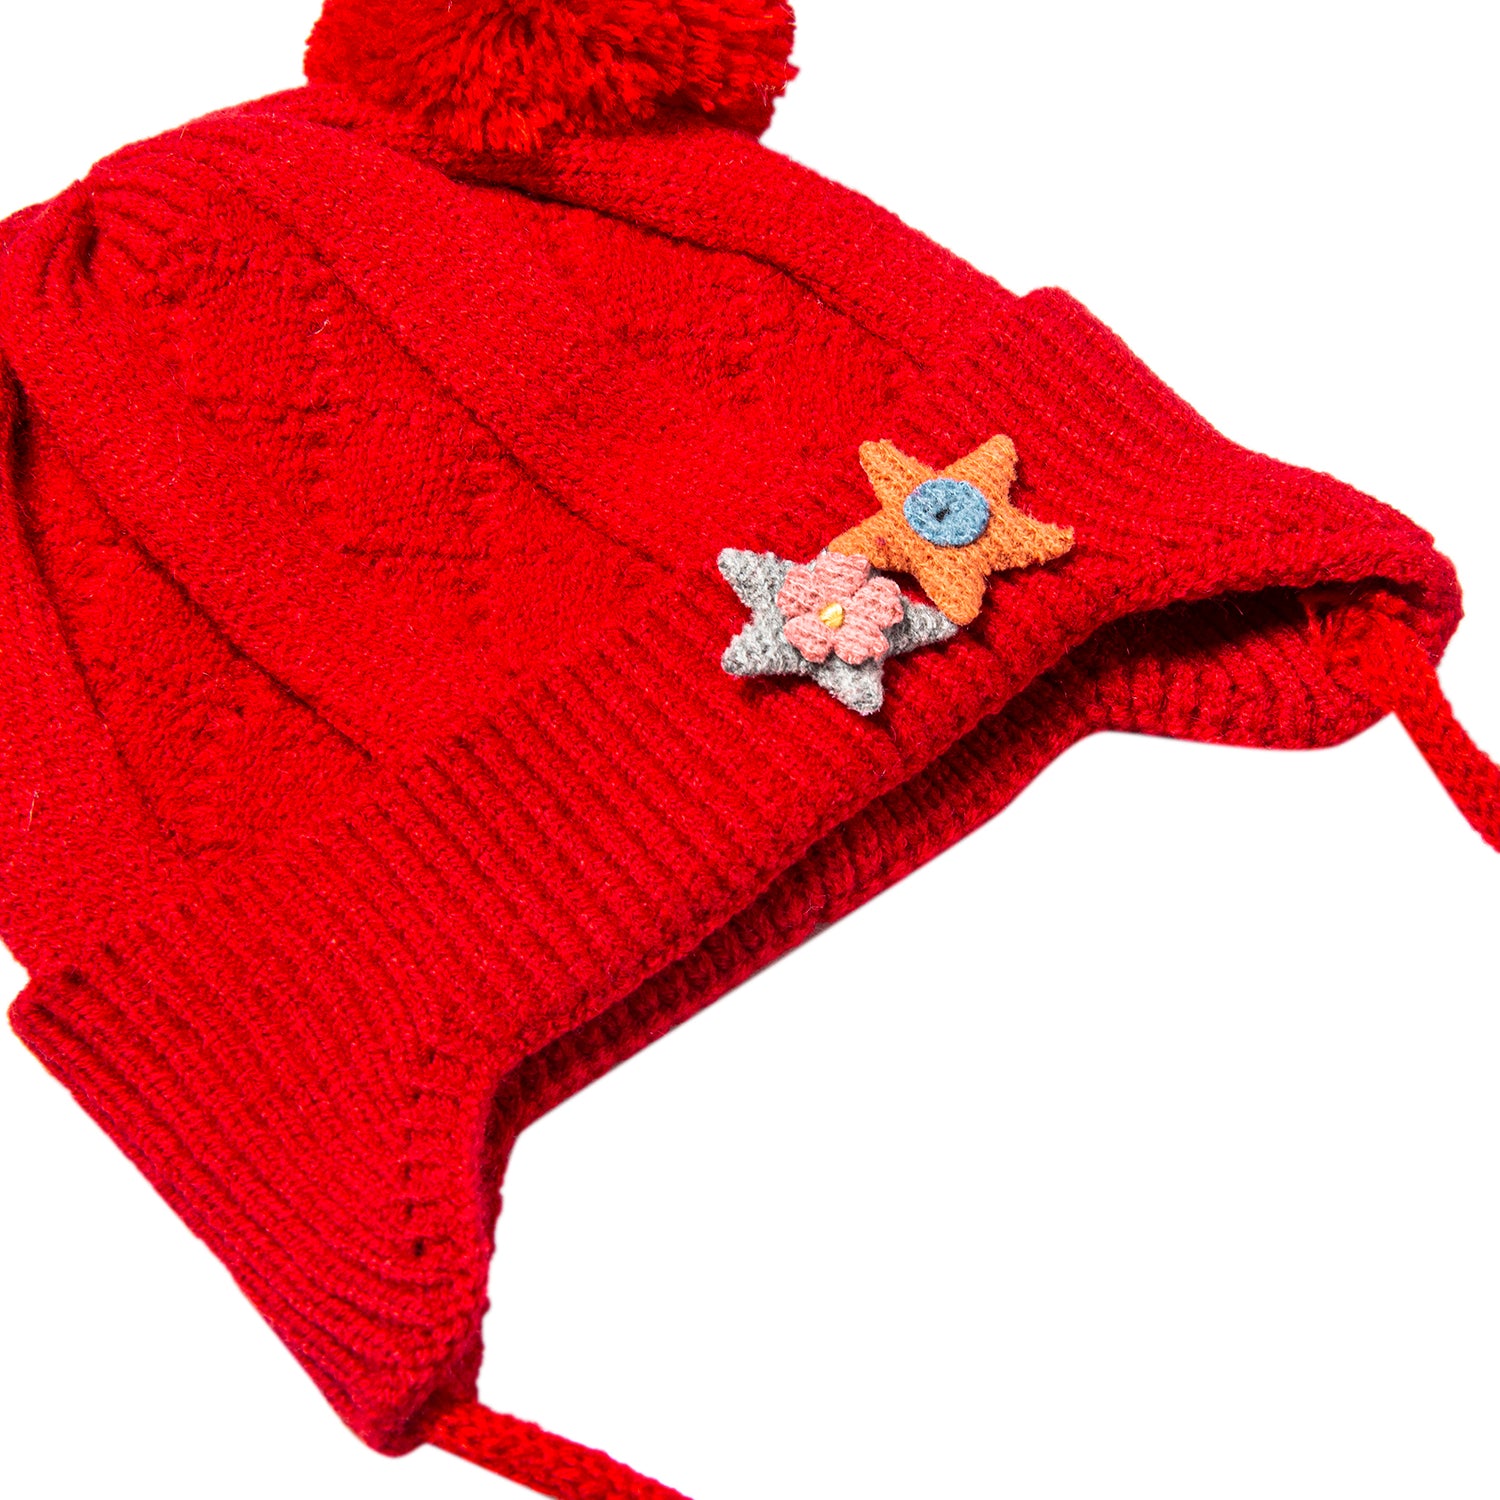 Knit Woollen Cap With Tie For Ear Cover Starry Pom Pom Red - Baby Moo